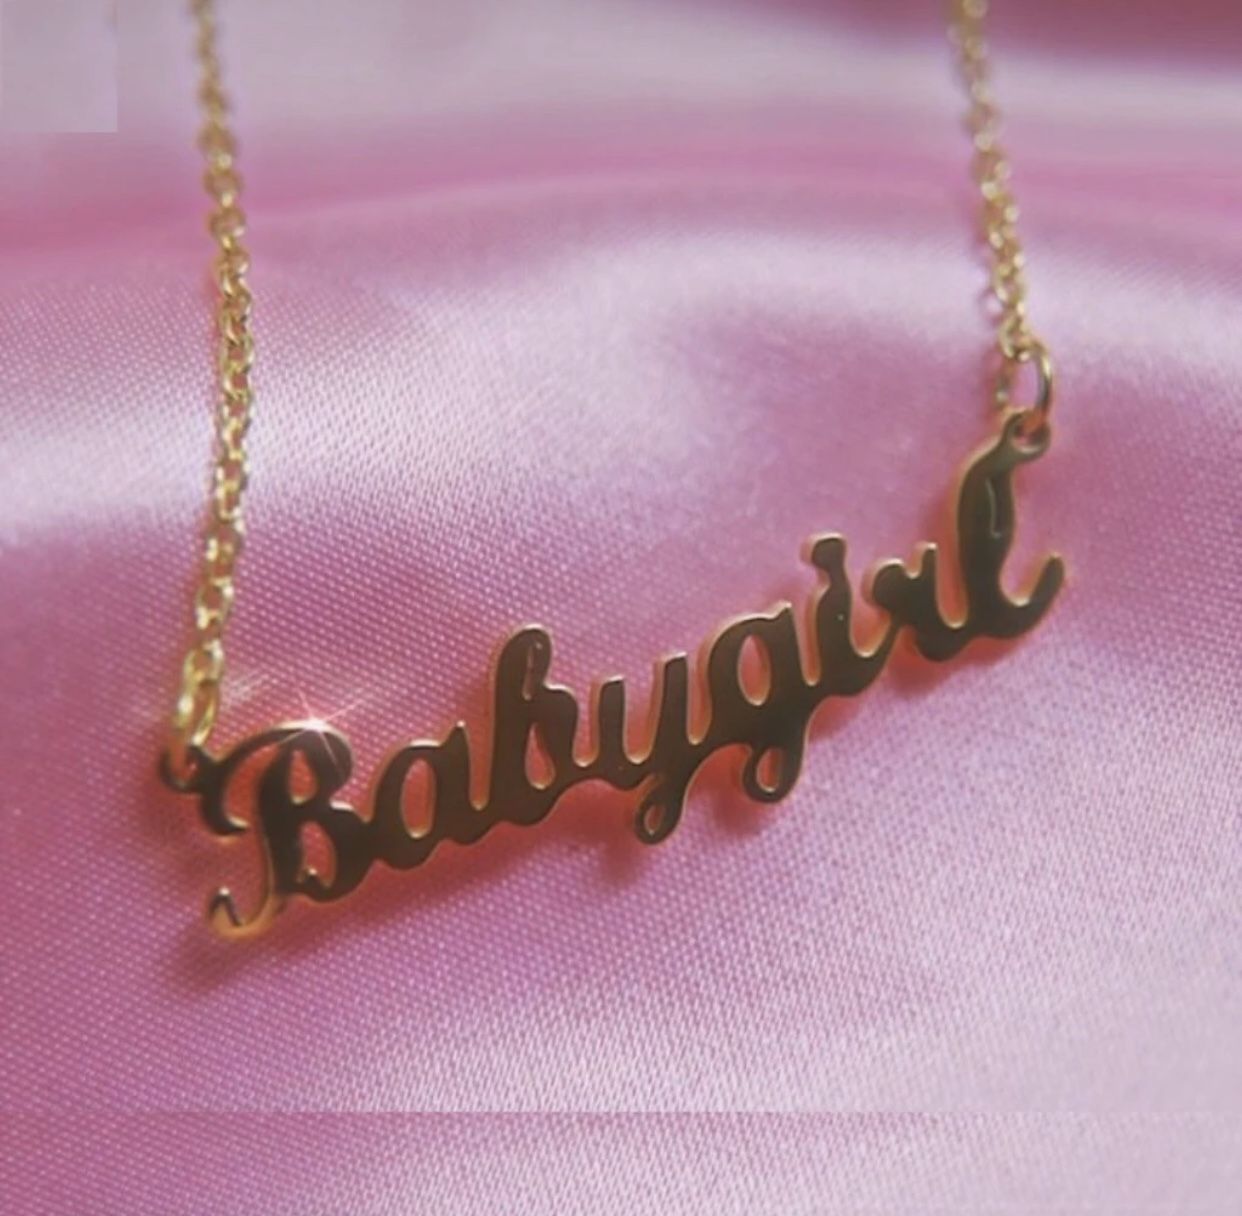 Baby Girl Necklace. Girls necklaces, Baby girl wallpaper, Baby bangles